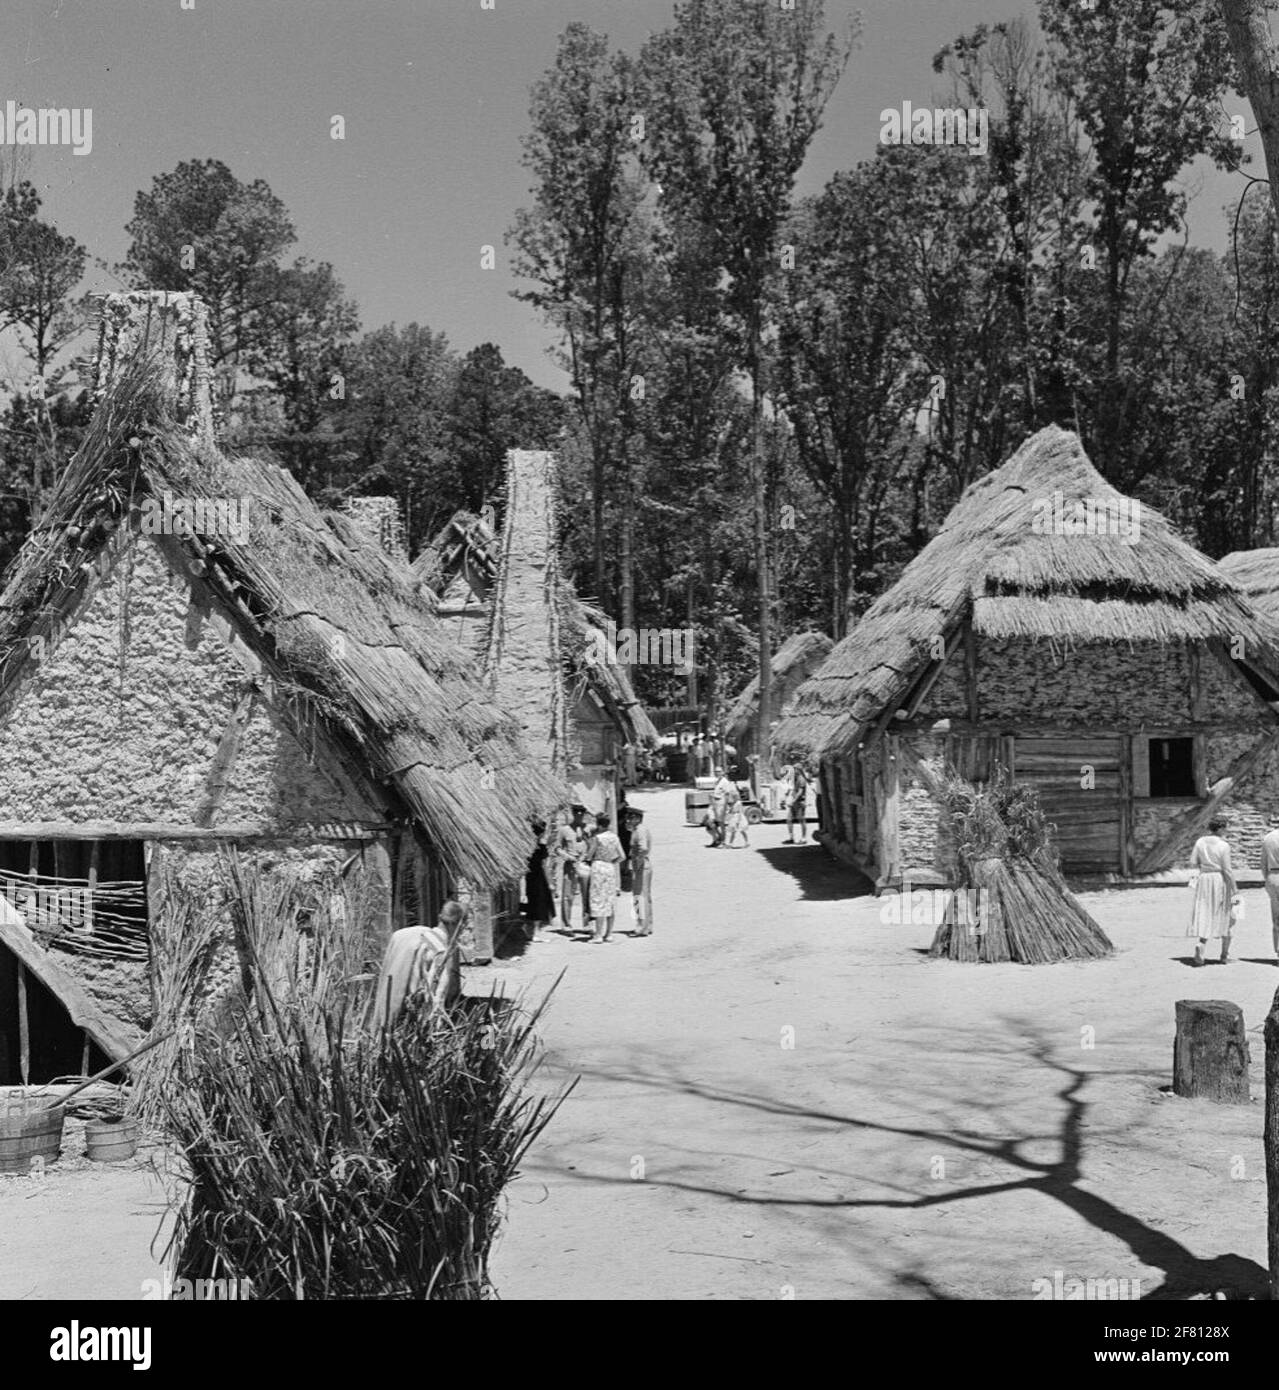 Replicas Of Houses In Jamestown Virginia The First English Permanent Settlement 1607 In The United States Stock Photo Alamy